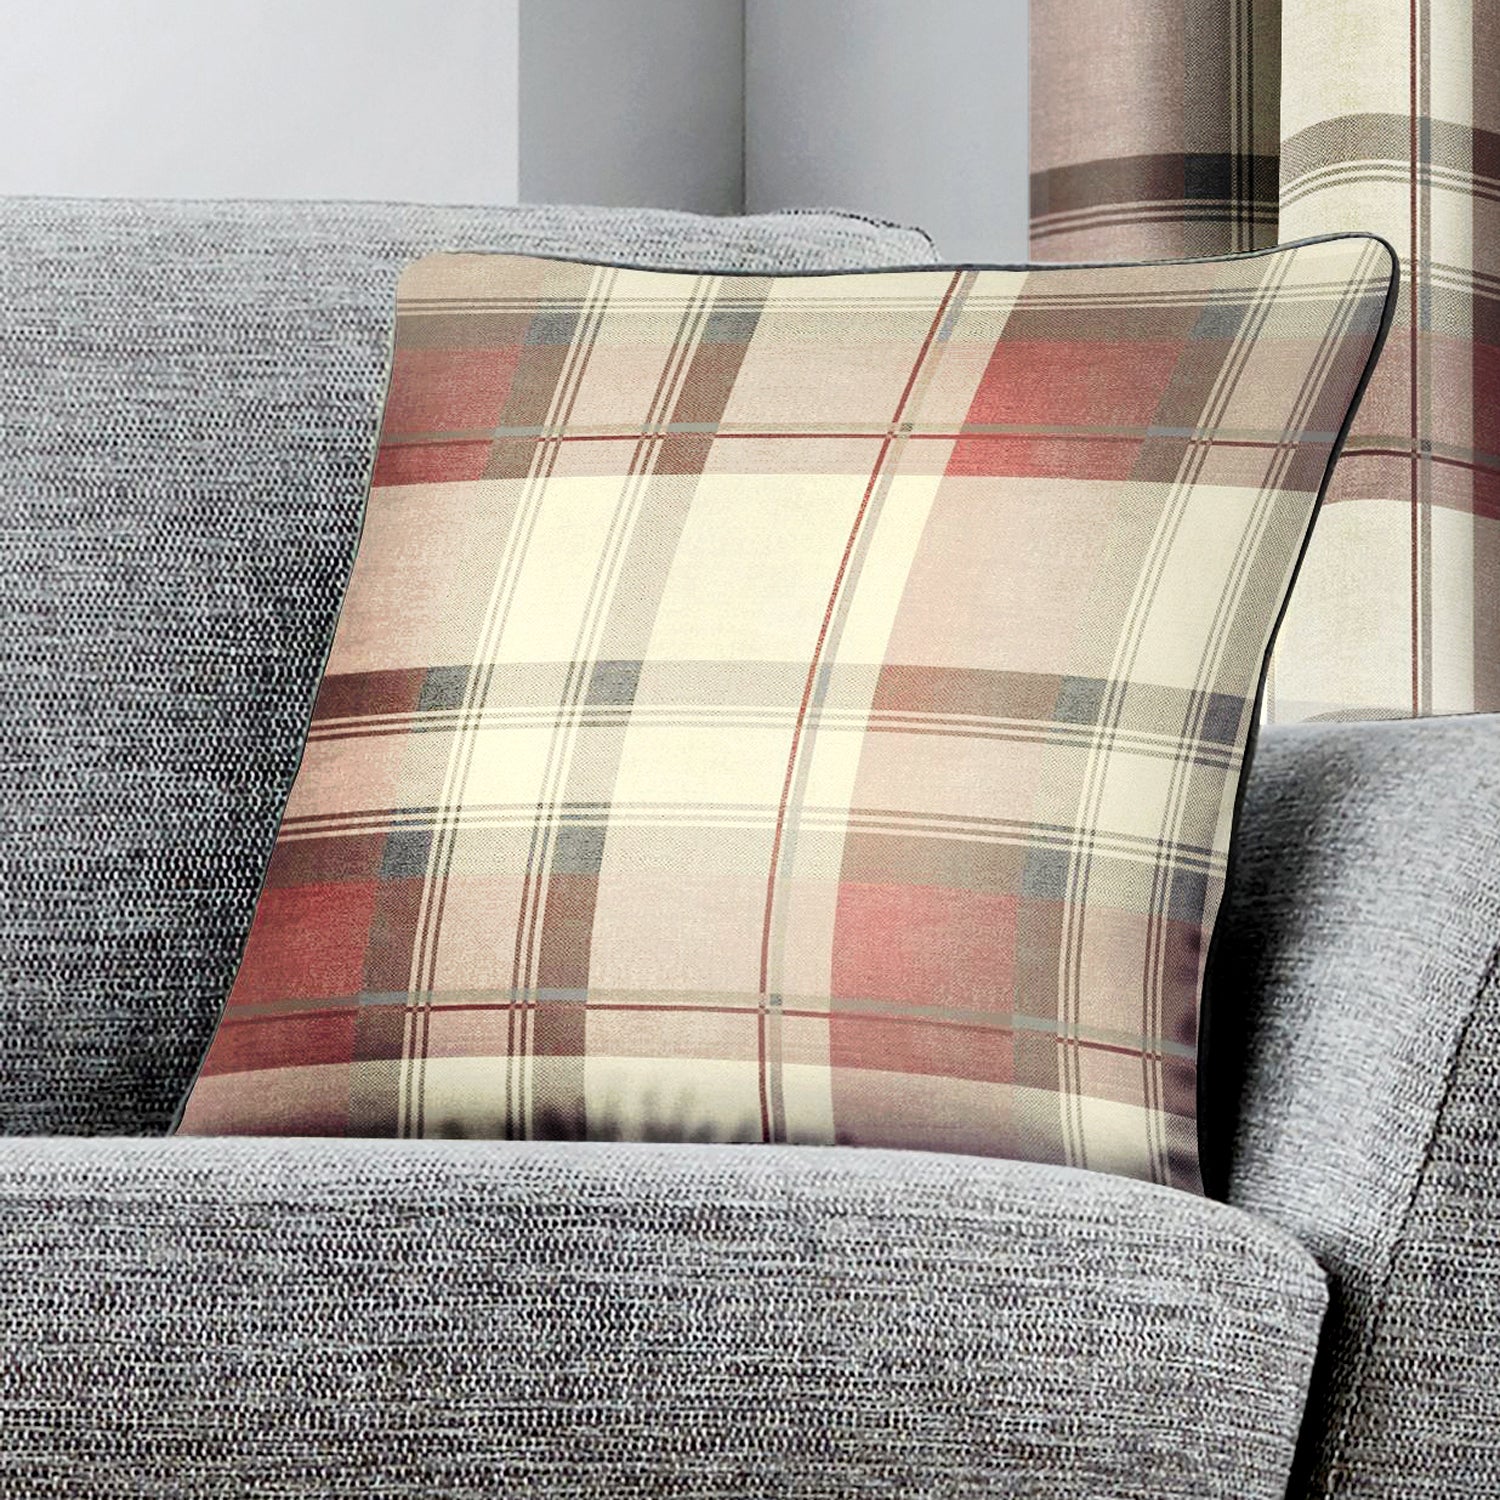 Balmoral Check - Filled Square Cushion - by Fusion